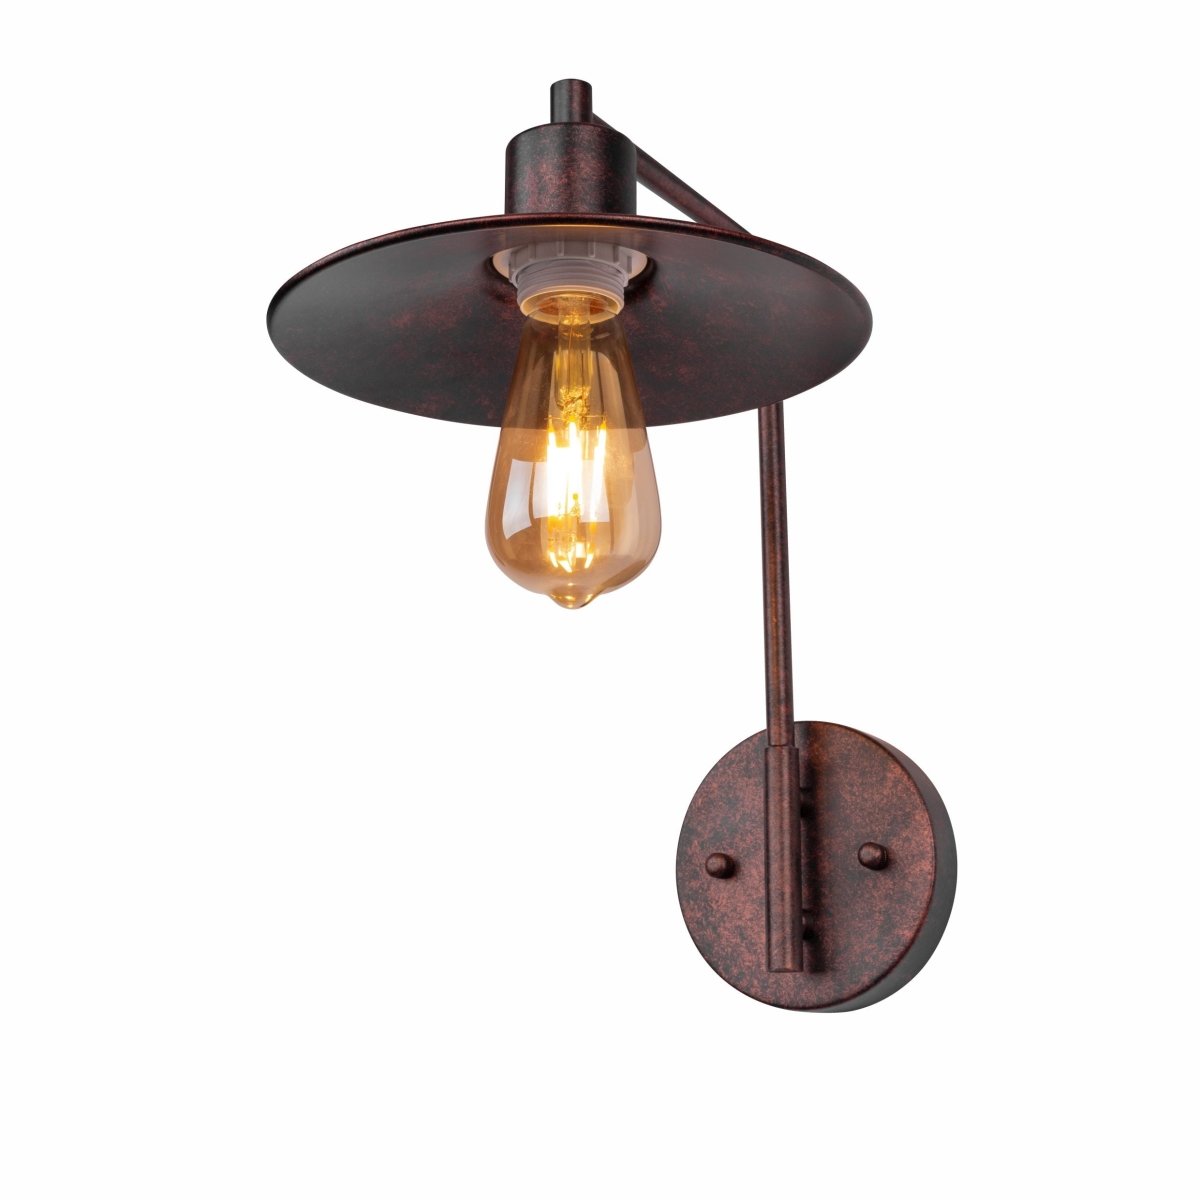 Main image of Red Bronze Metal Flat Wall Light with E27 Fitting | TEKLED 151-19640